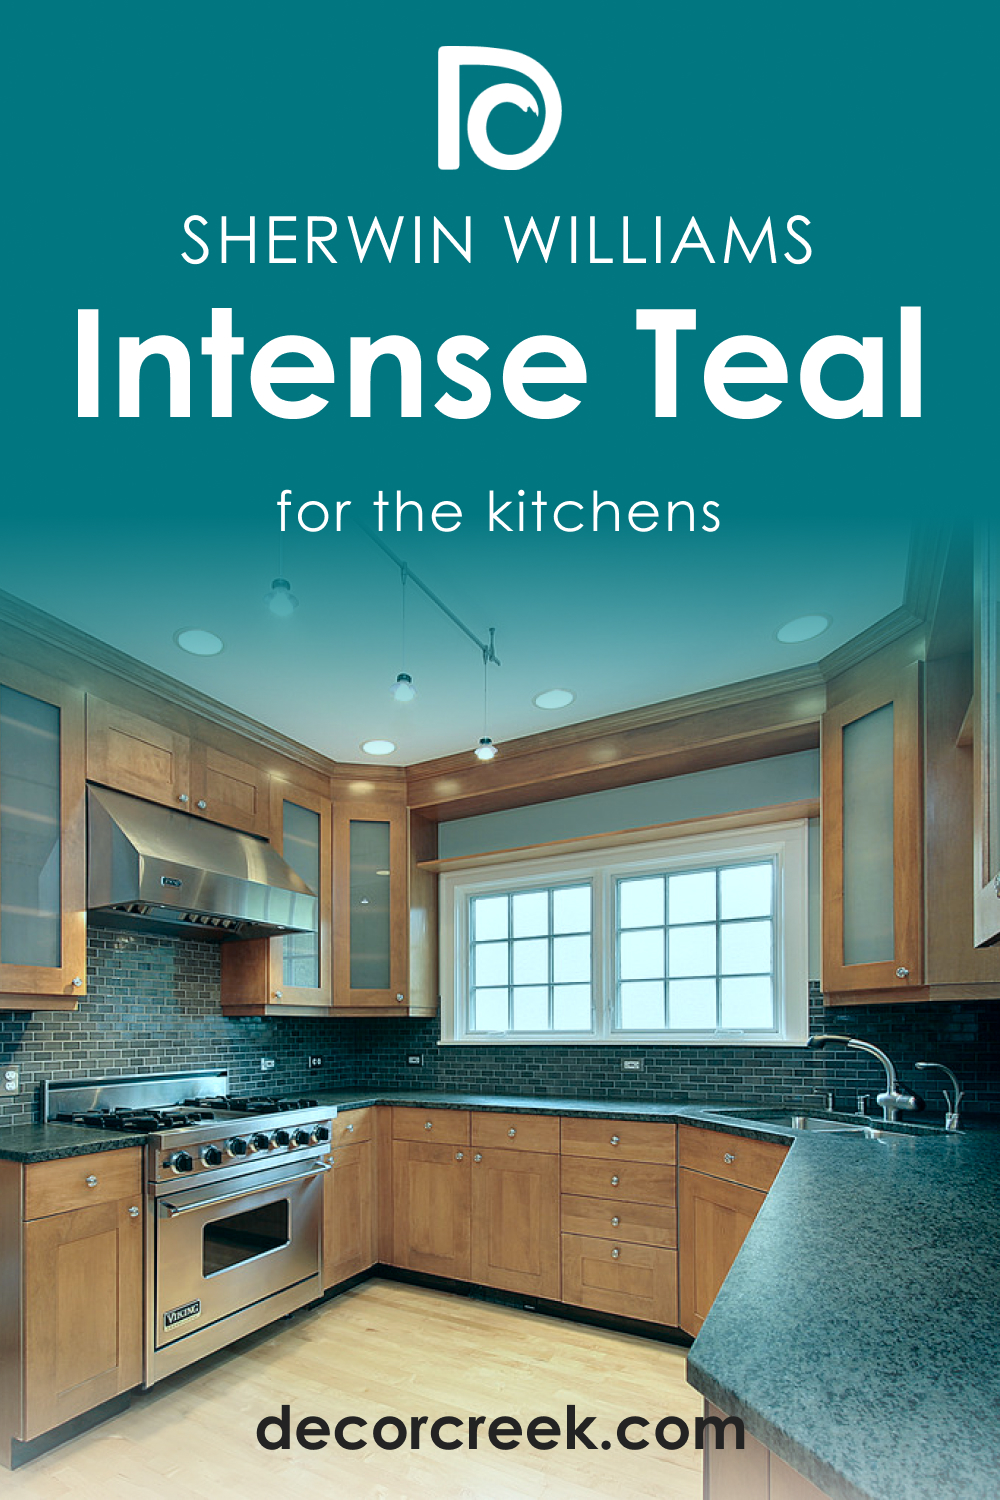 How to Use SW 6943 Intense Teal in the Kitchen?